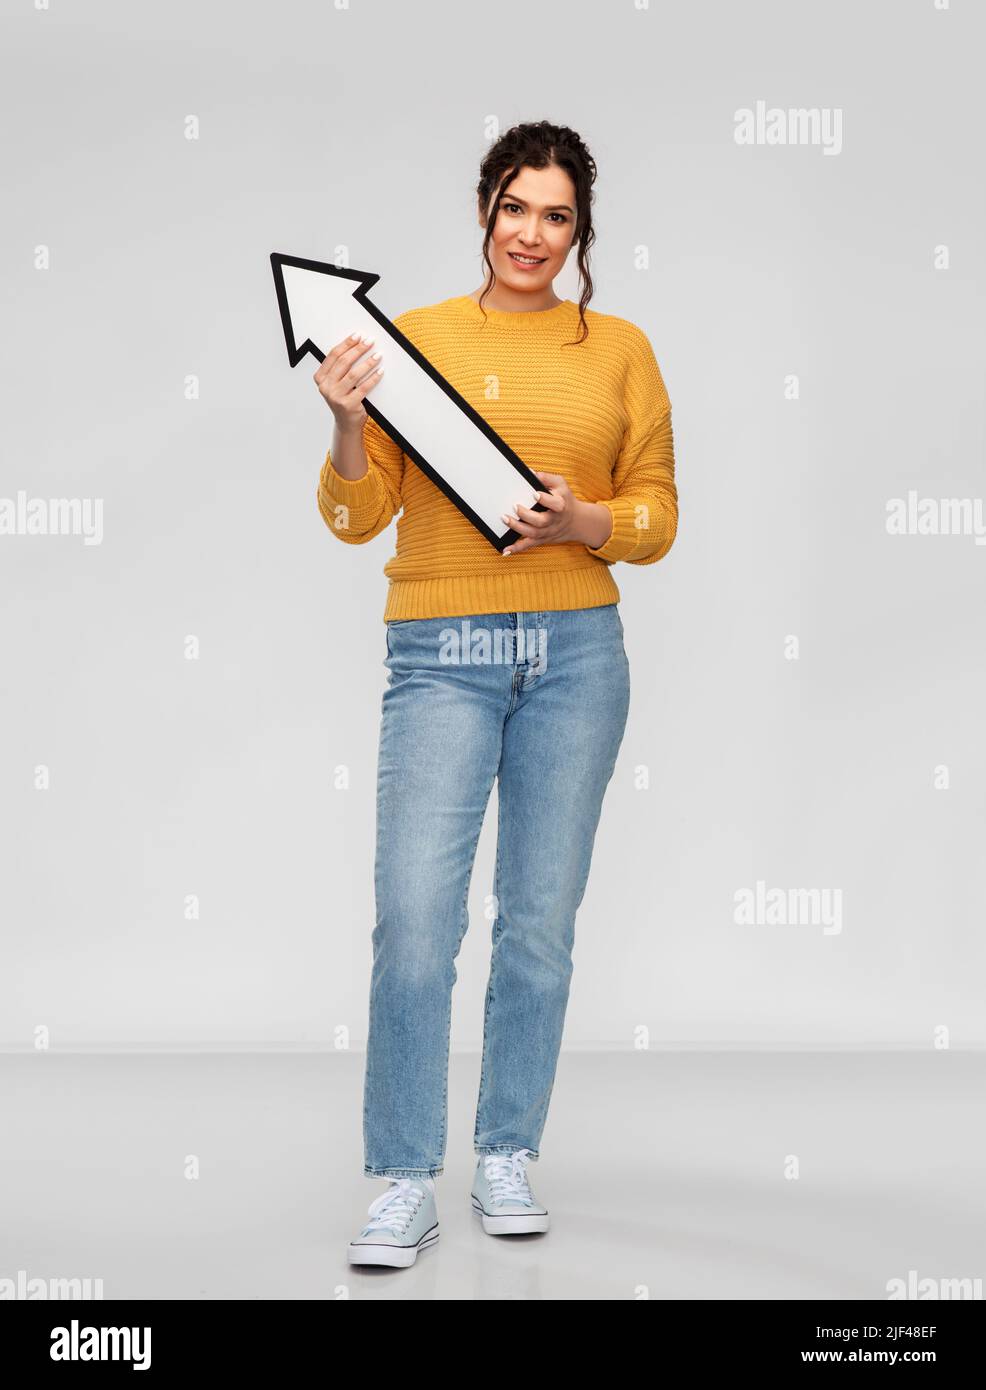 smiling young woman with big white upward arrow Stock Photo